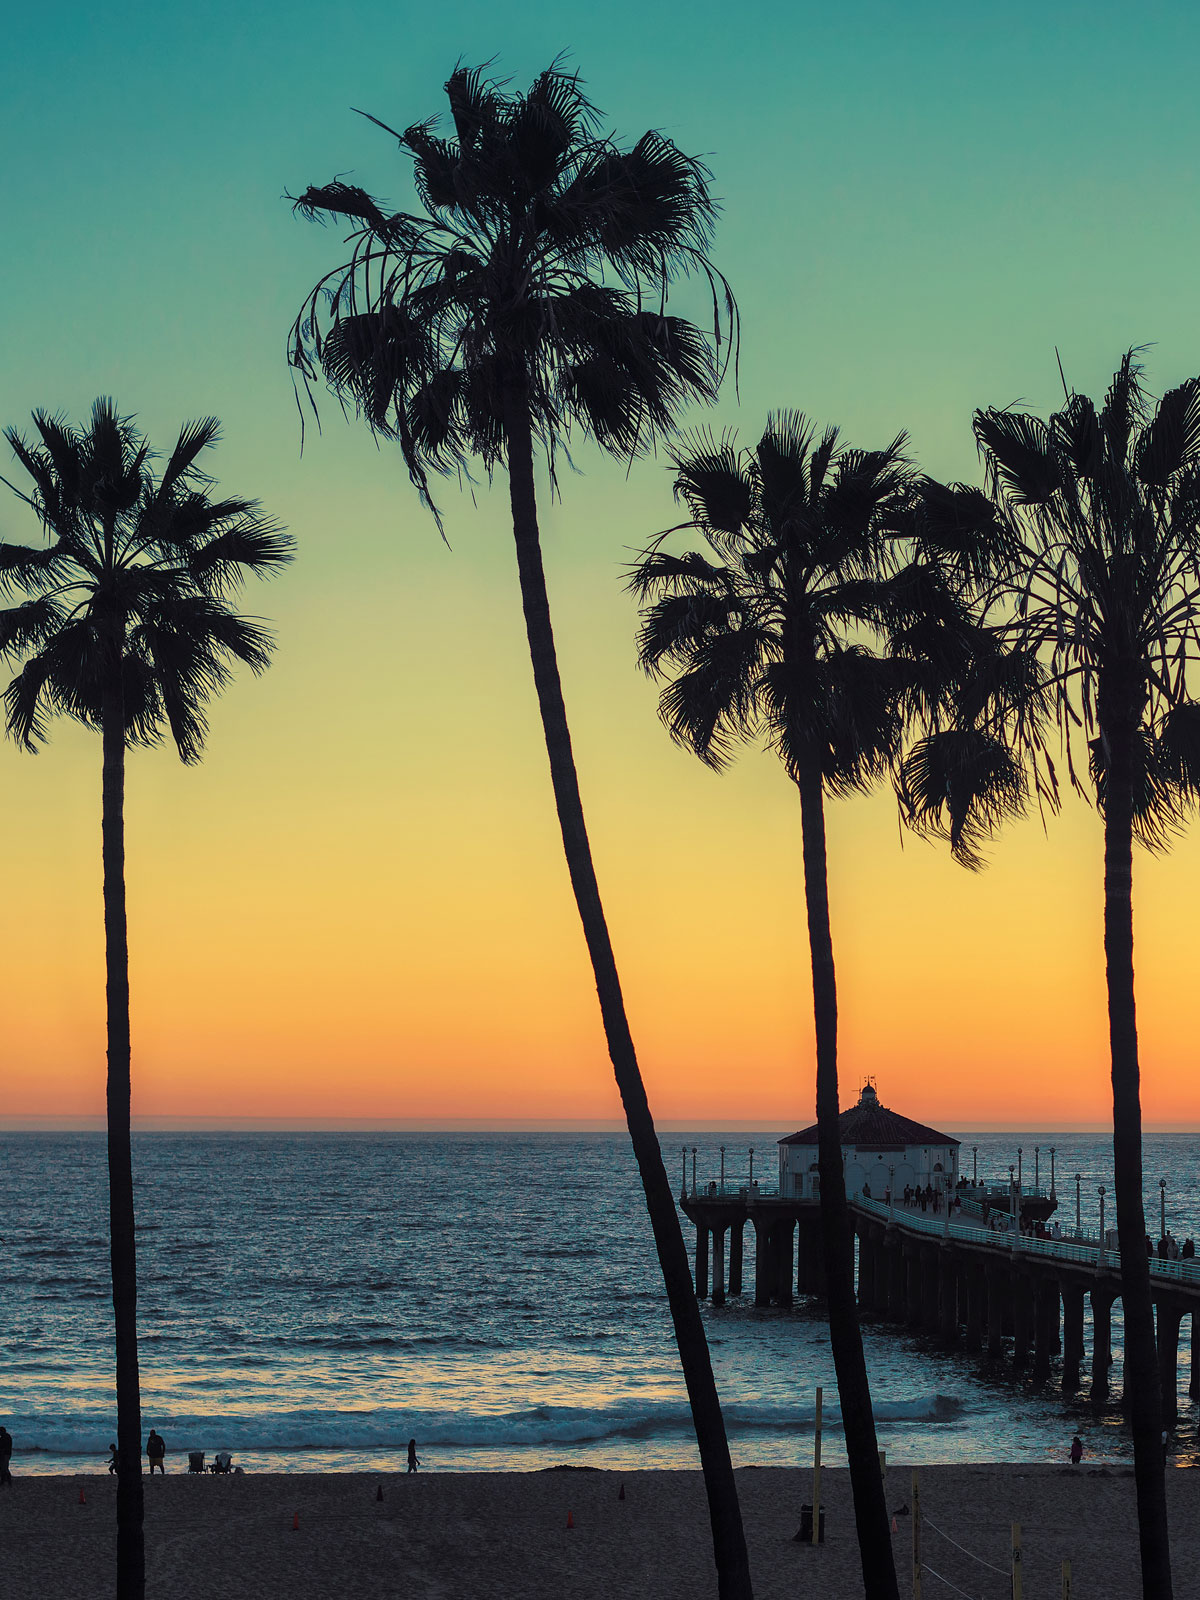 Palm trees in the sunset.